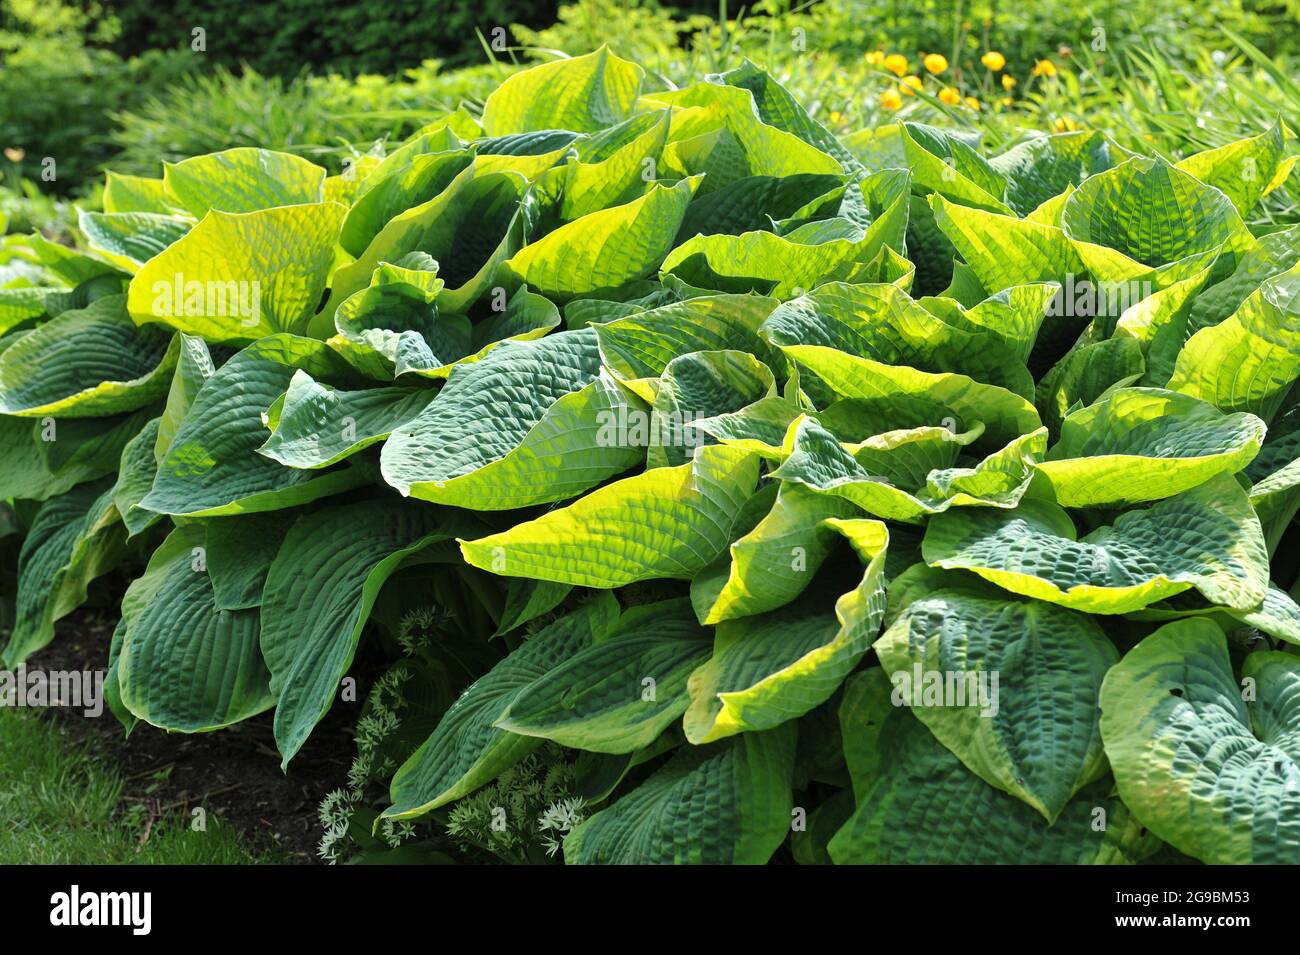 Giant Hosta Frances Williams with large variegated bluish-green leaves grows in a garden in May Stock Photo